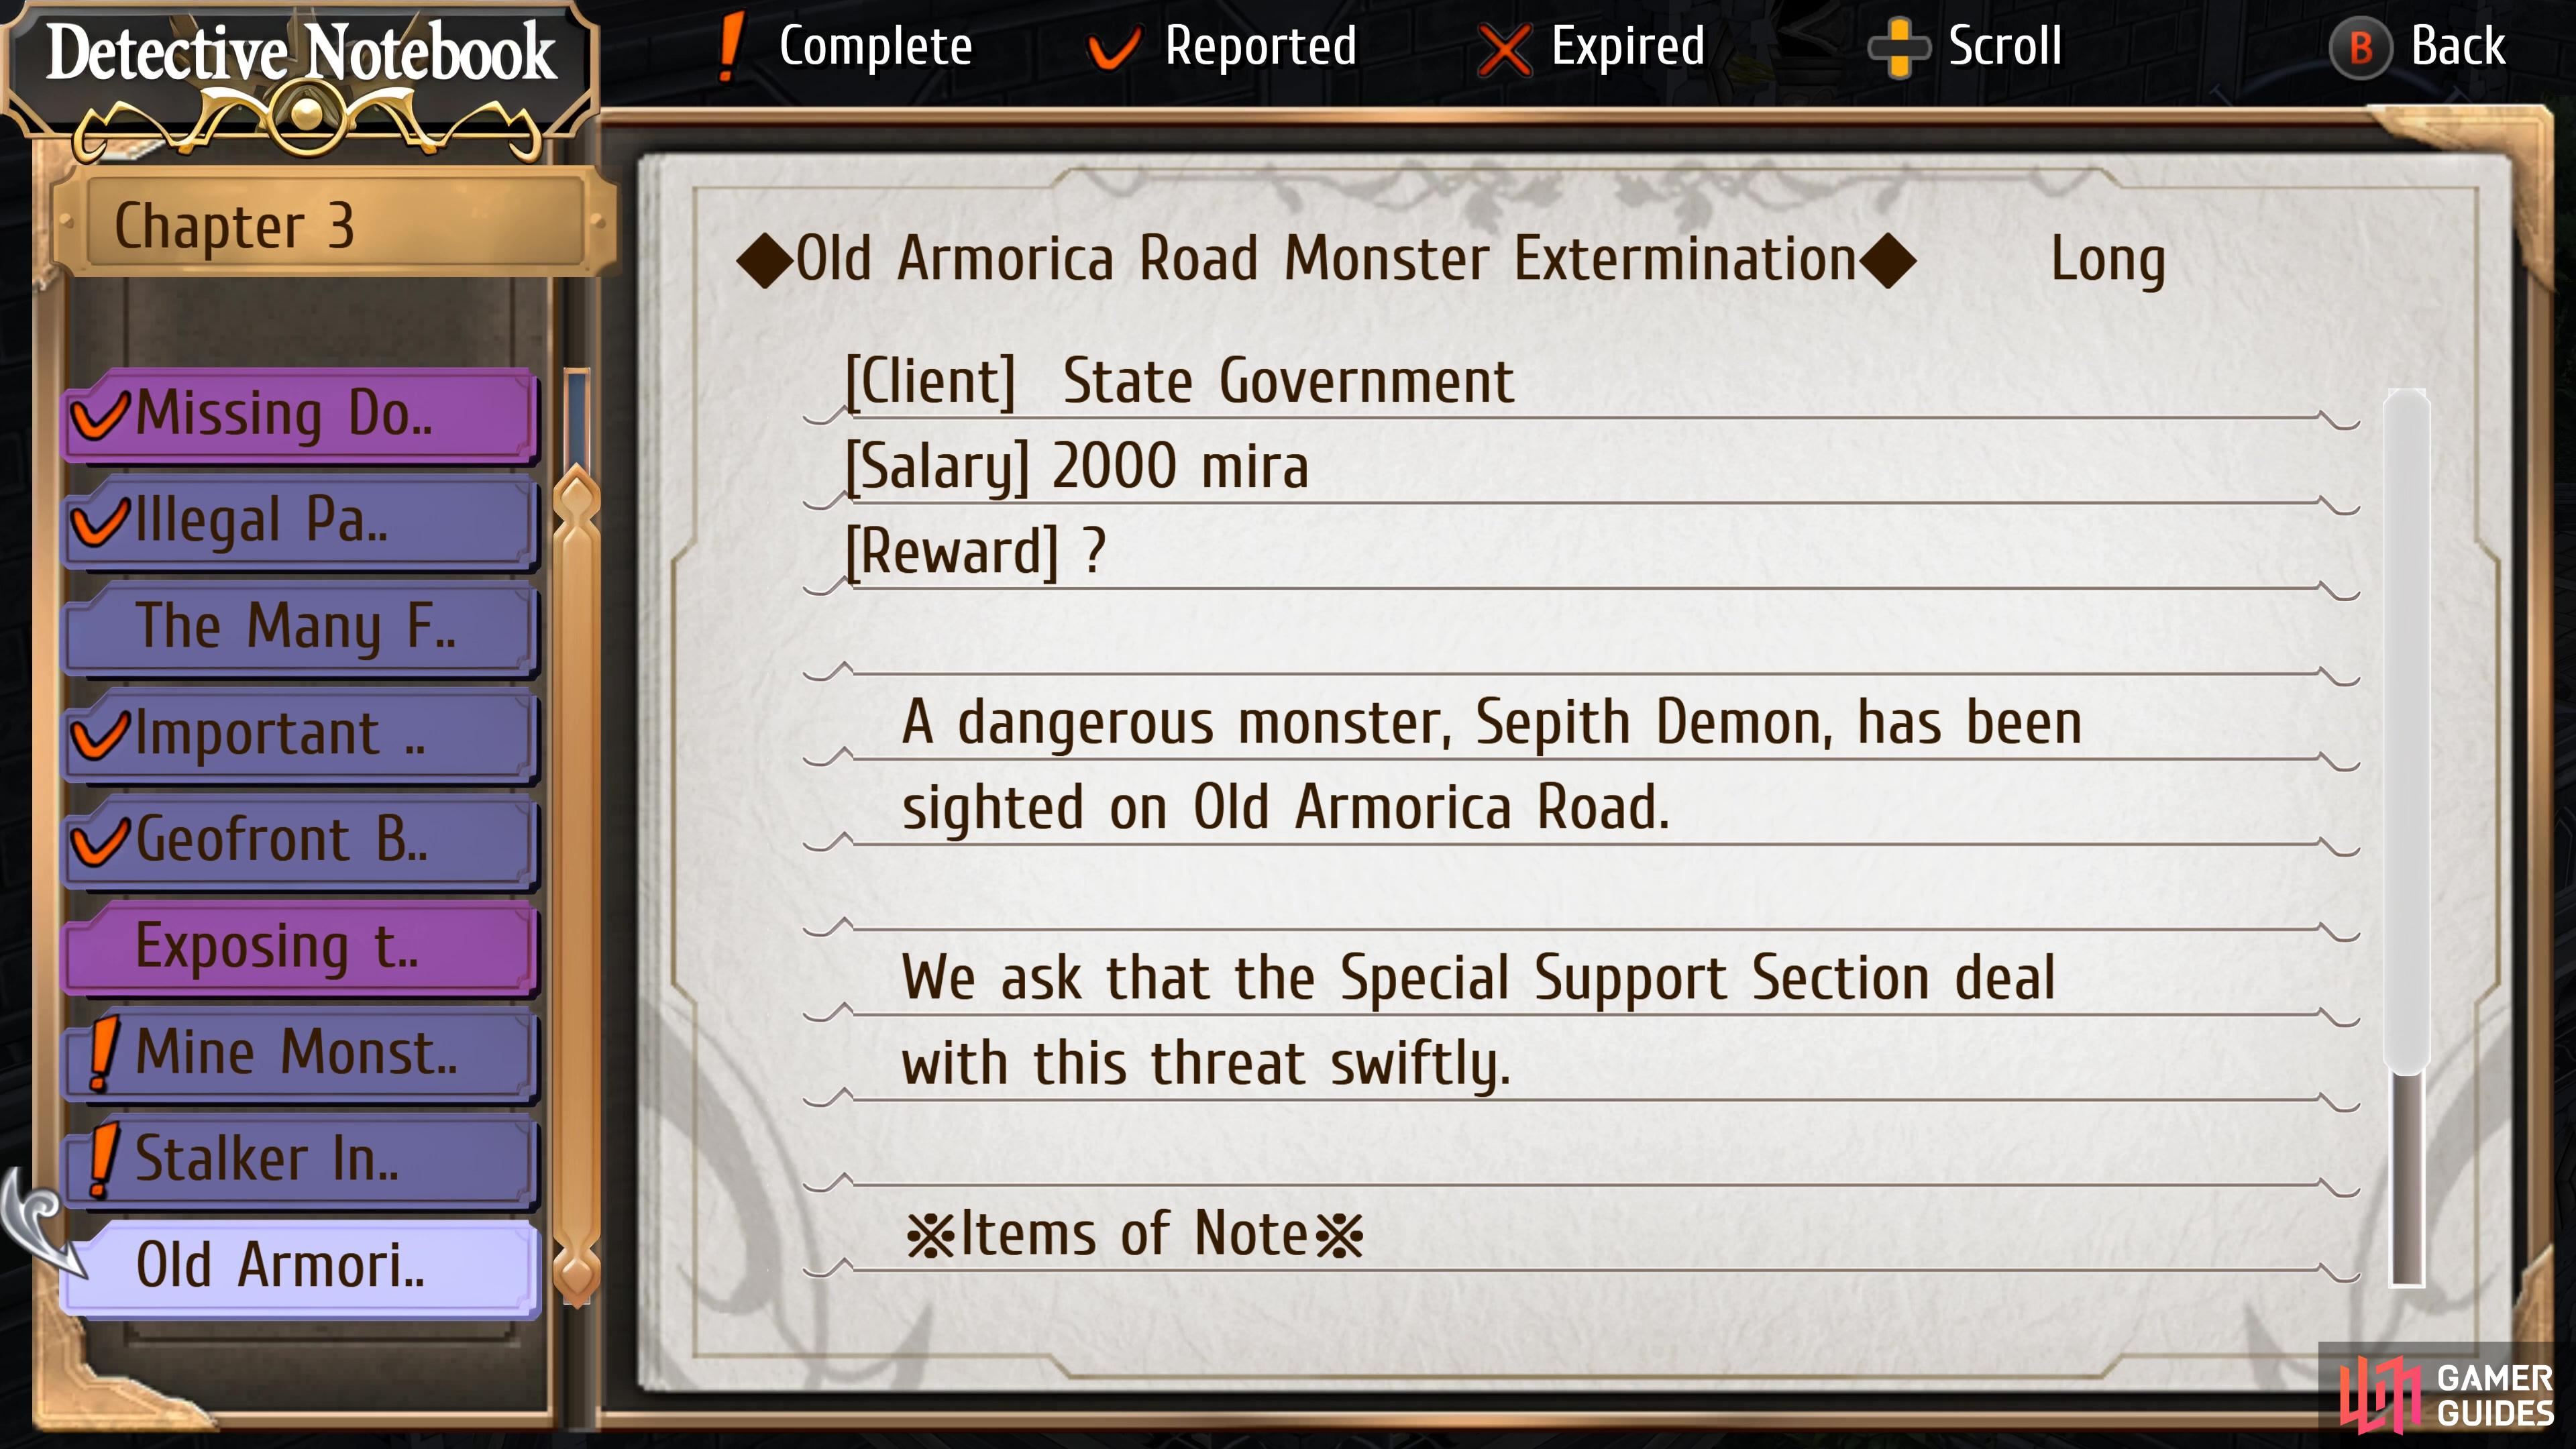 Old Armorica Road Monster Extermination is a Request on Chapter 3 Day 2.